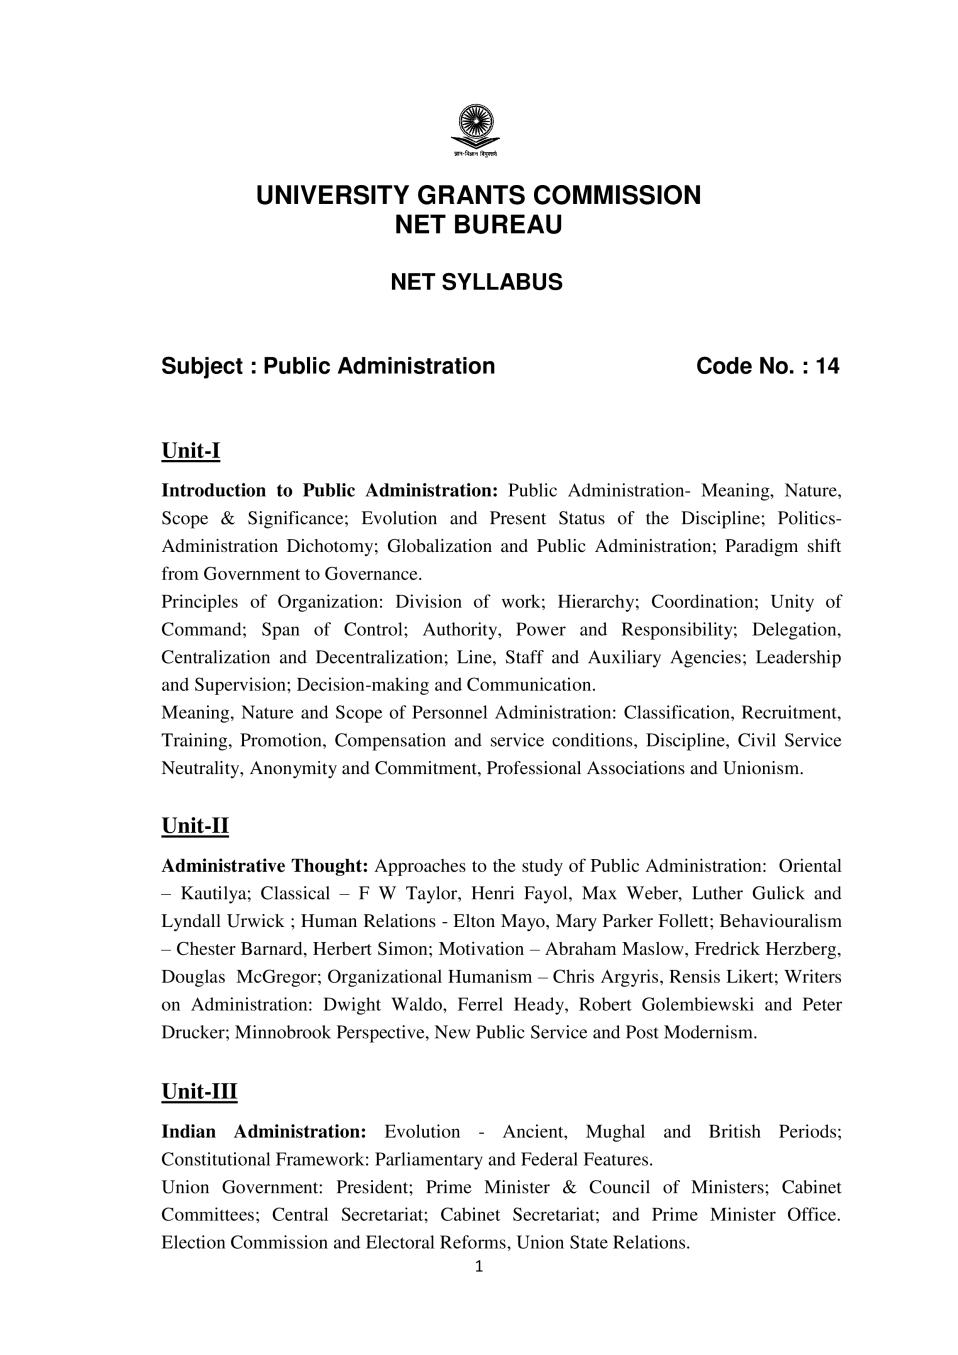 UGC NET Syllabus for Public Administration 2020 - Page 1